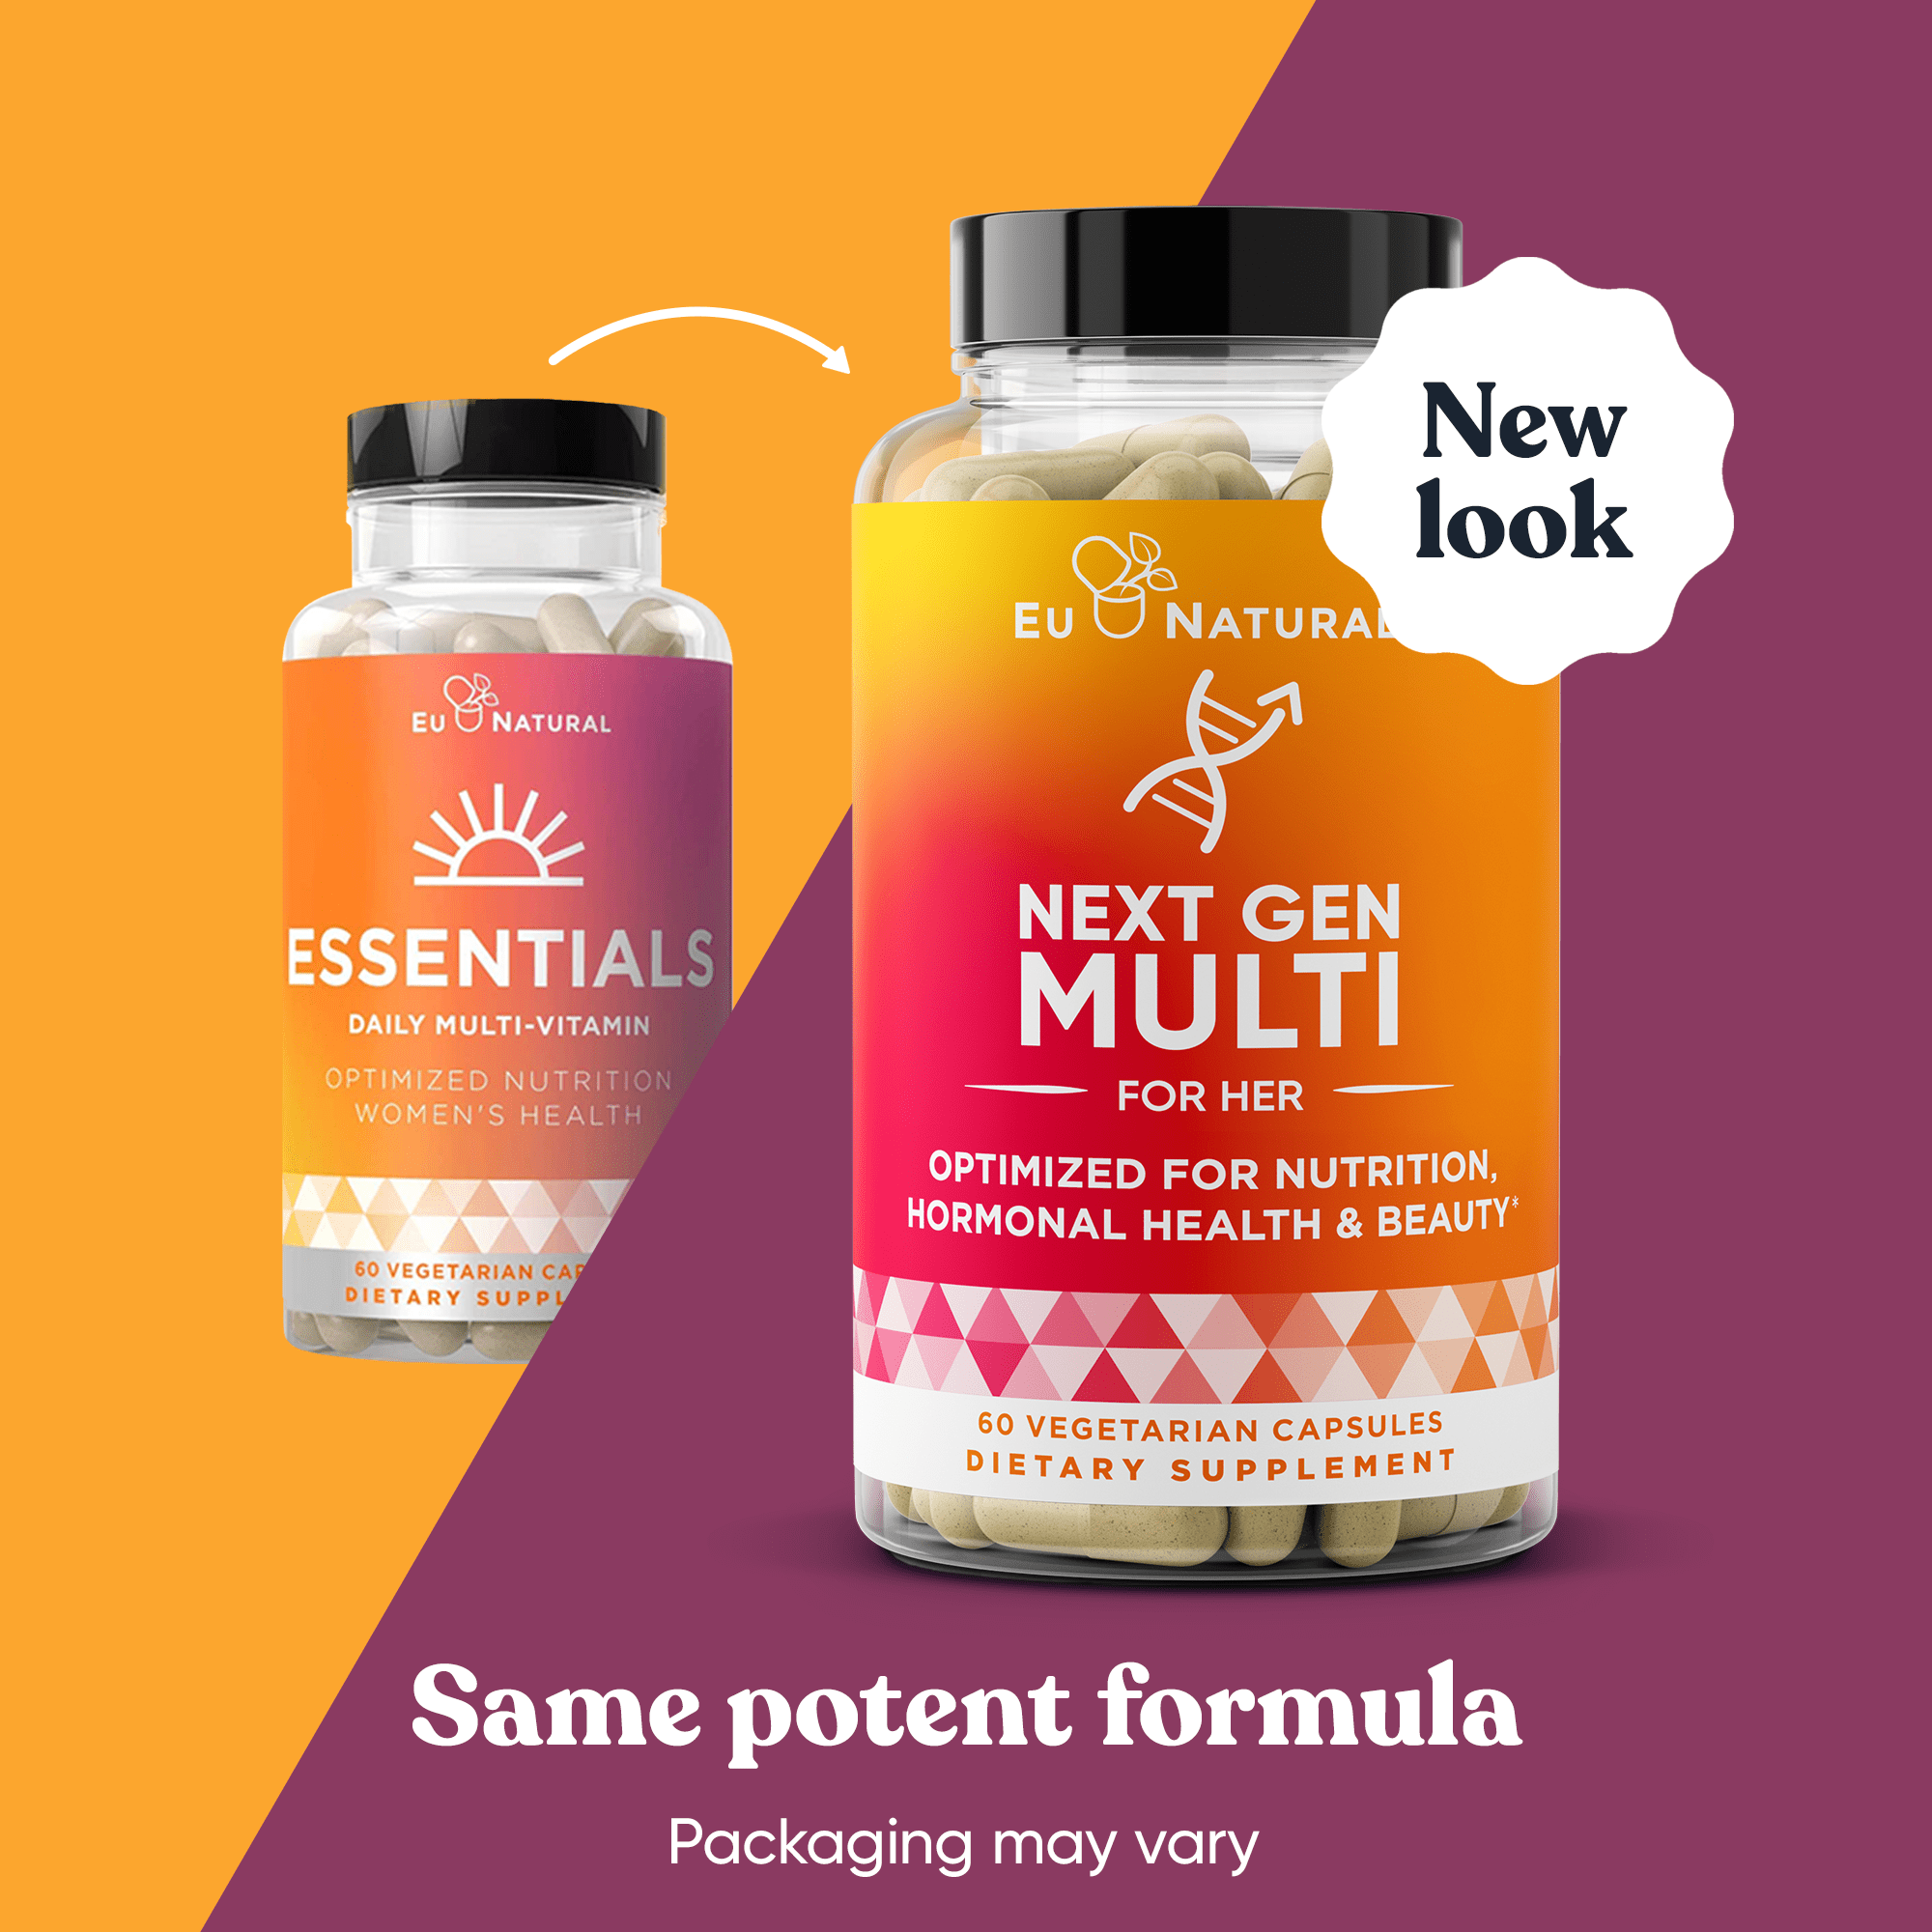 NEXT GEN FOR HER MULTIVITAMIN FOR WOMEN (formerly known as